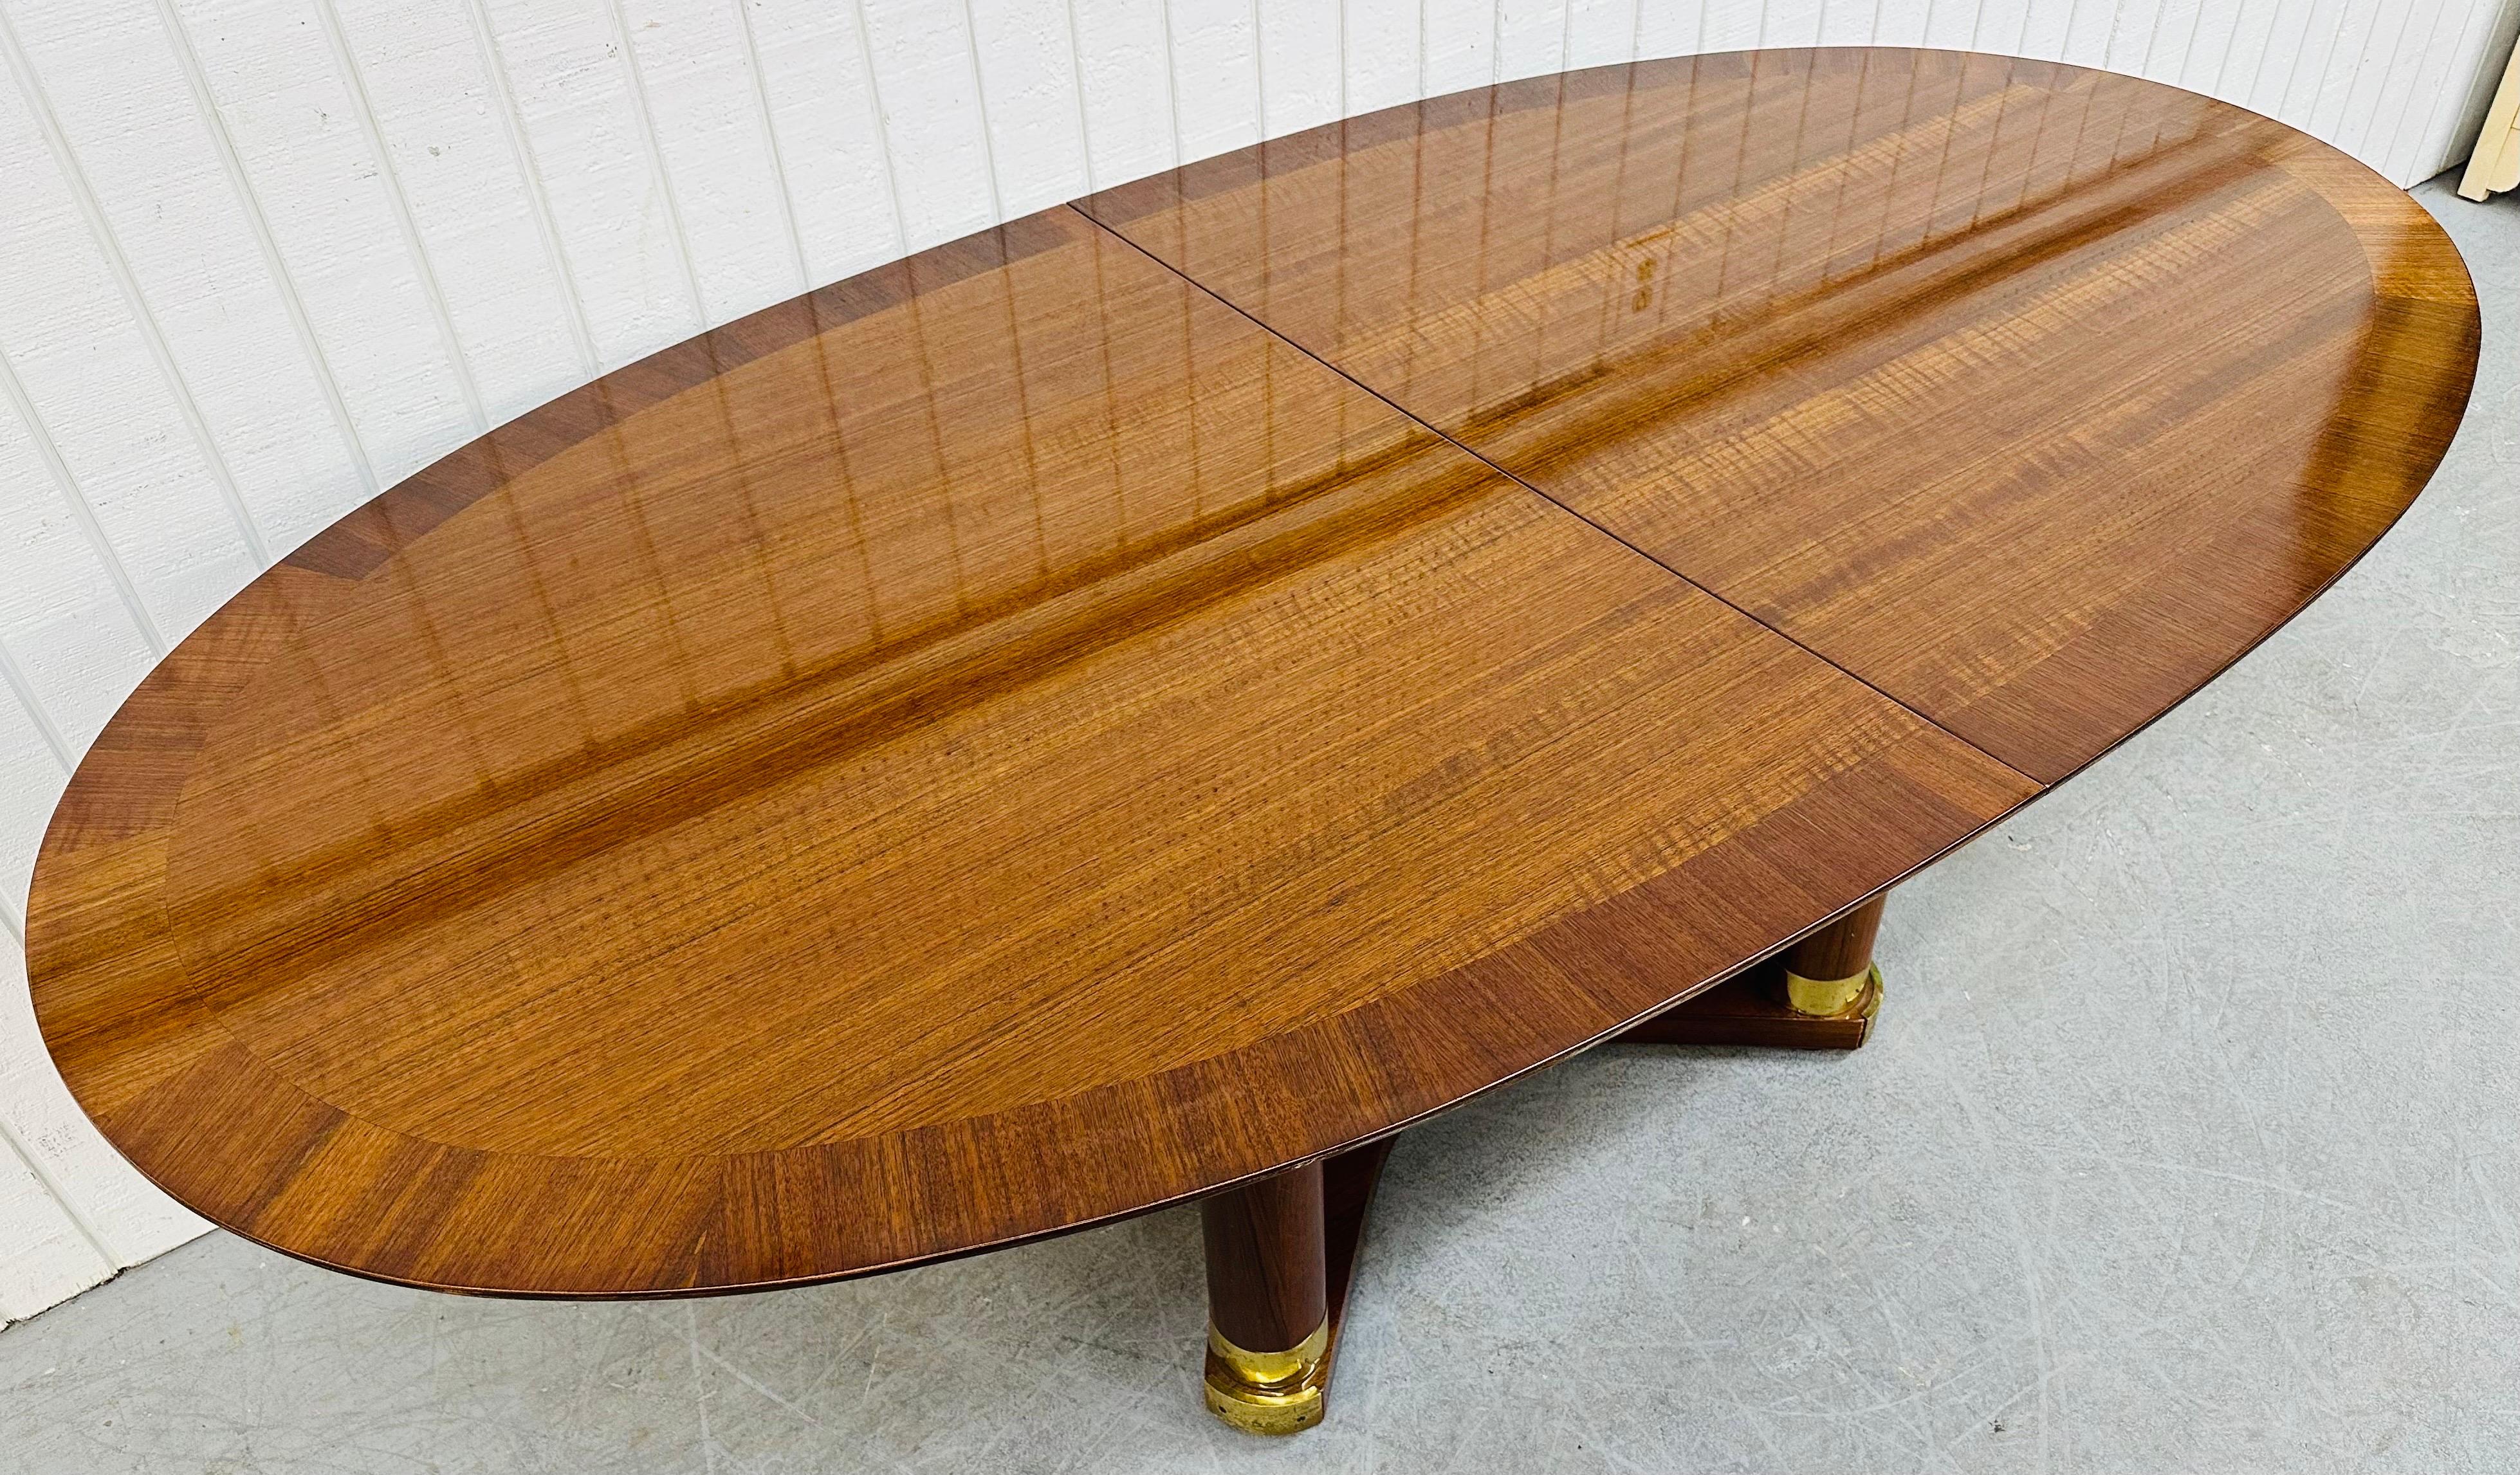 This listing is for a vintage Henredon Oval Banded Mahogany Dining Table. Featuring an oval top, pedestal base with gold caps, one leaf to expand the table to 100” L, and a beautiful mahogany finish. This is an exceptional combination of quality and